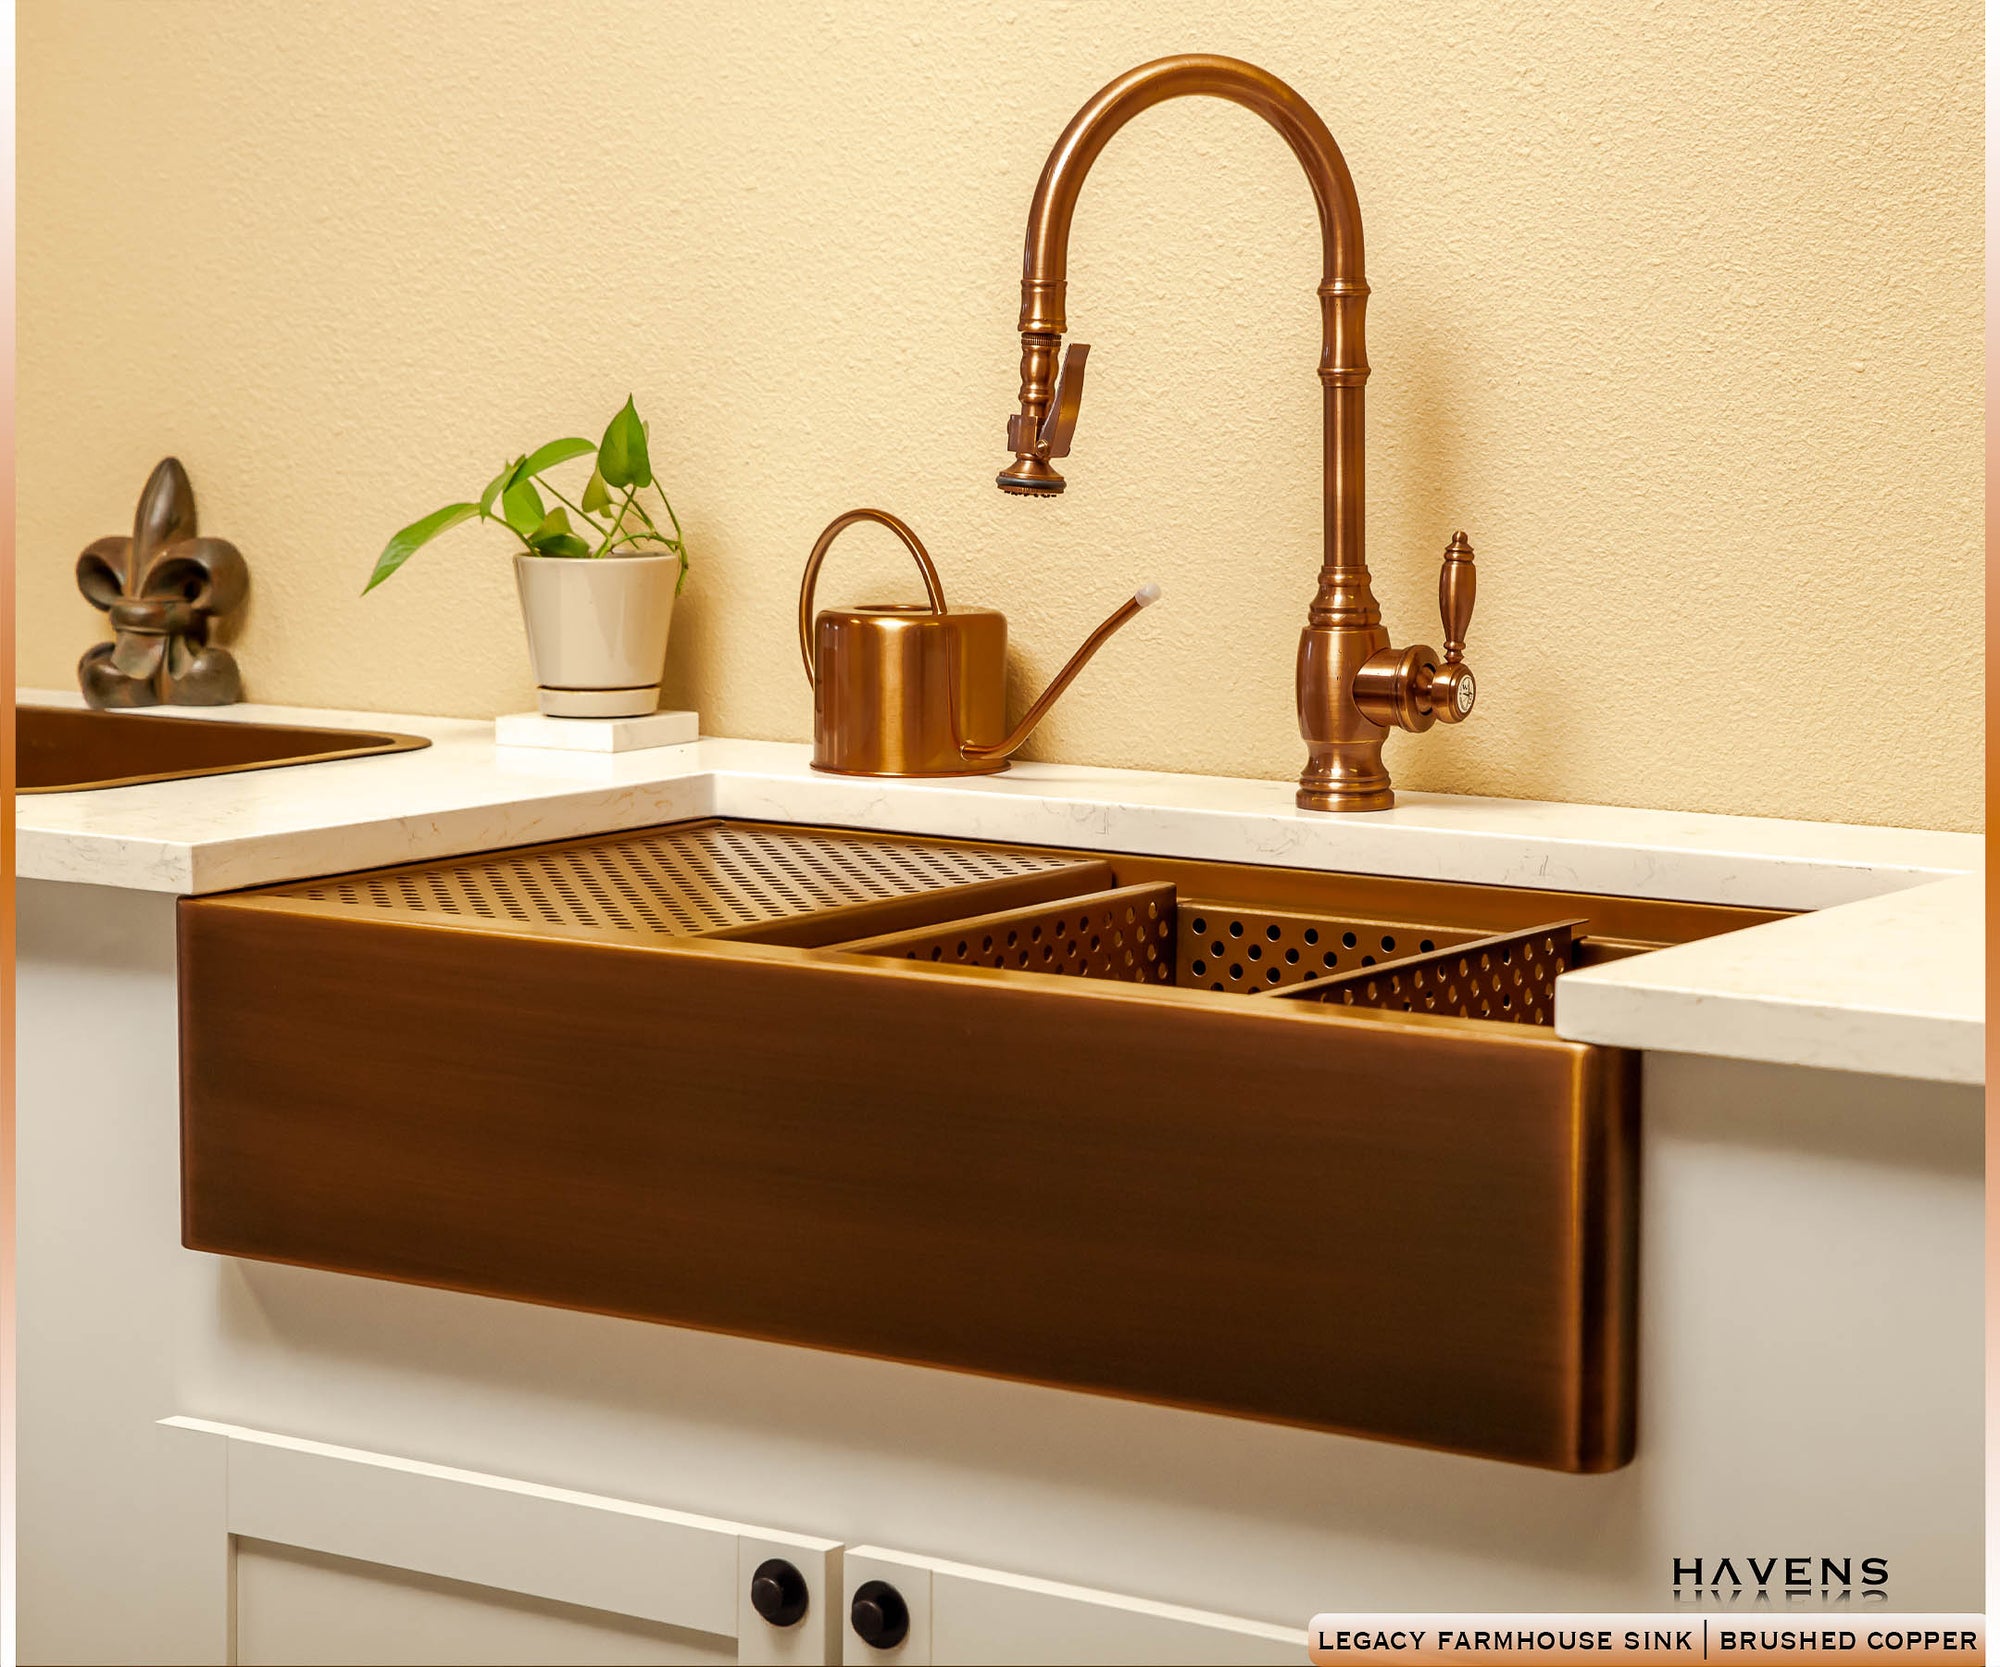 Legacy Farmhouse Sink - Brushed Copper